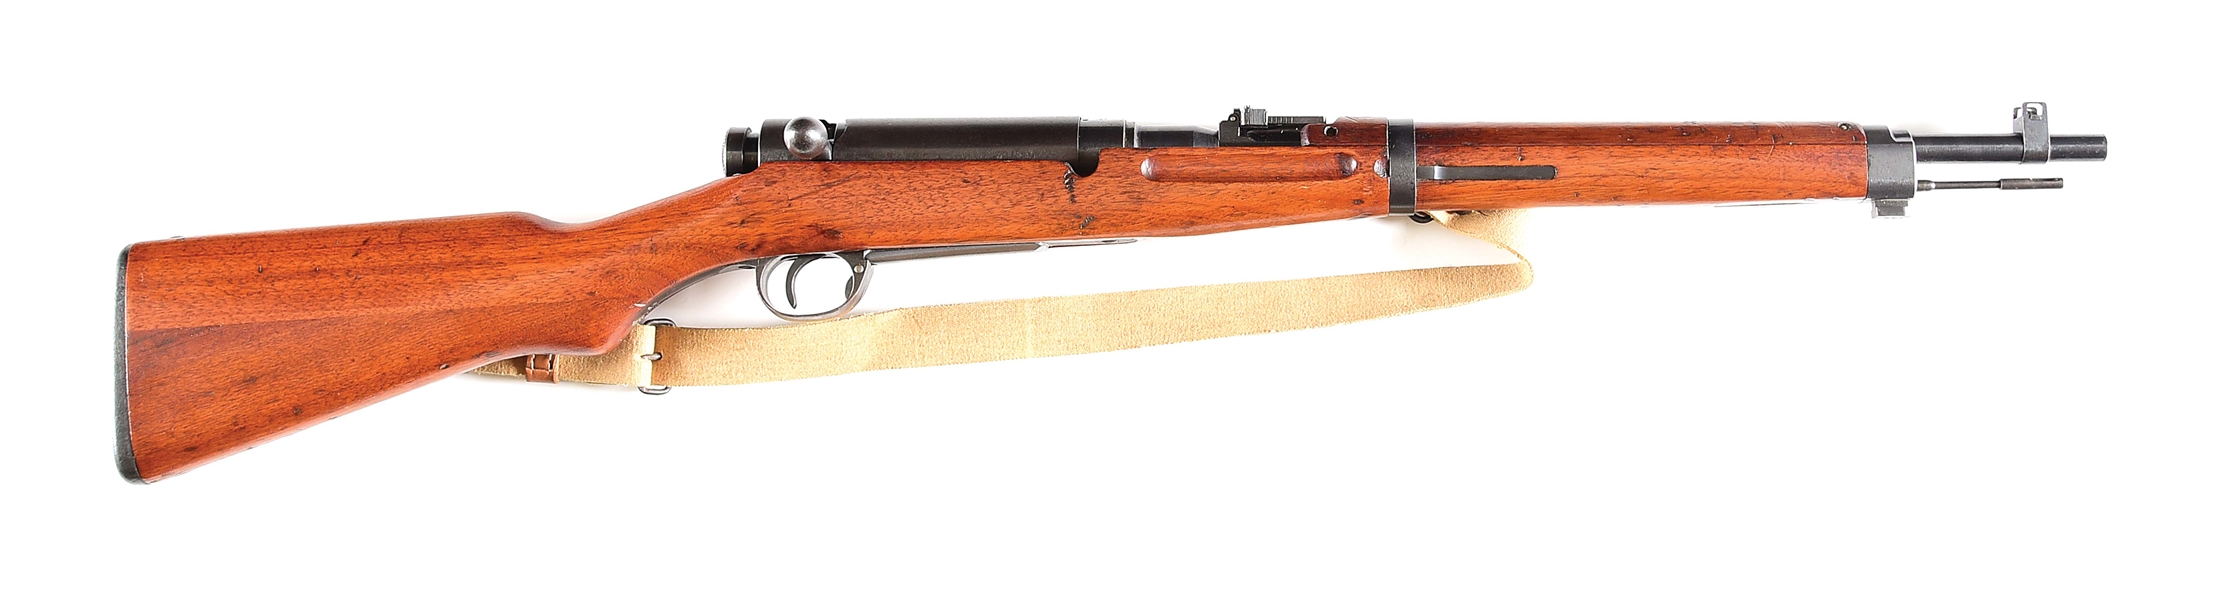 (C) VERY FINE IMPERIAL JAPANESE NAGOYA ARSENAL SERIES 4 TYPE 38 BOLT ACTION CARBINE.